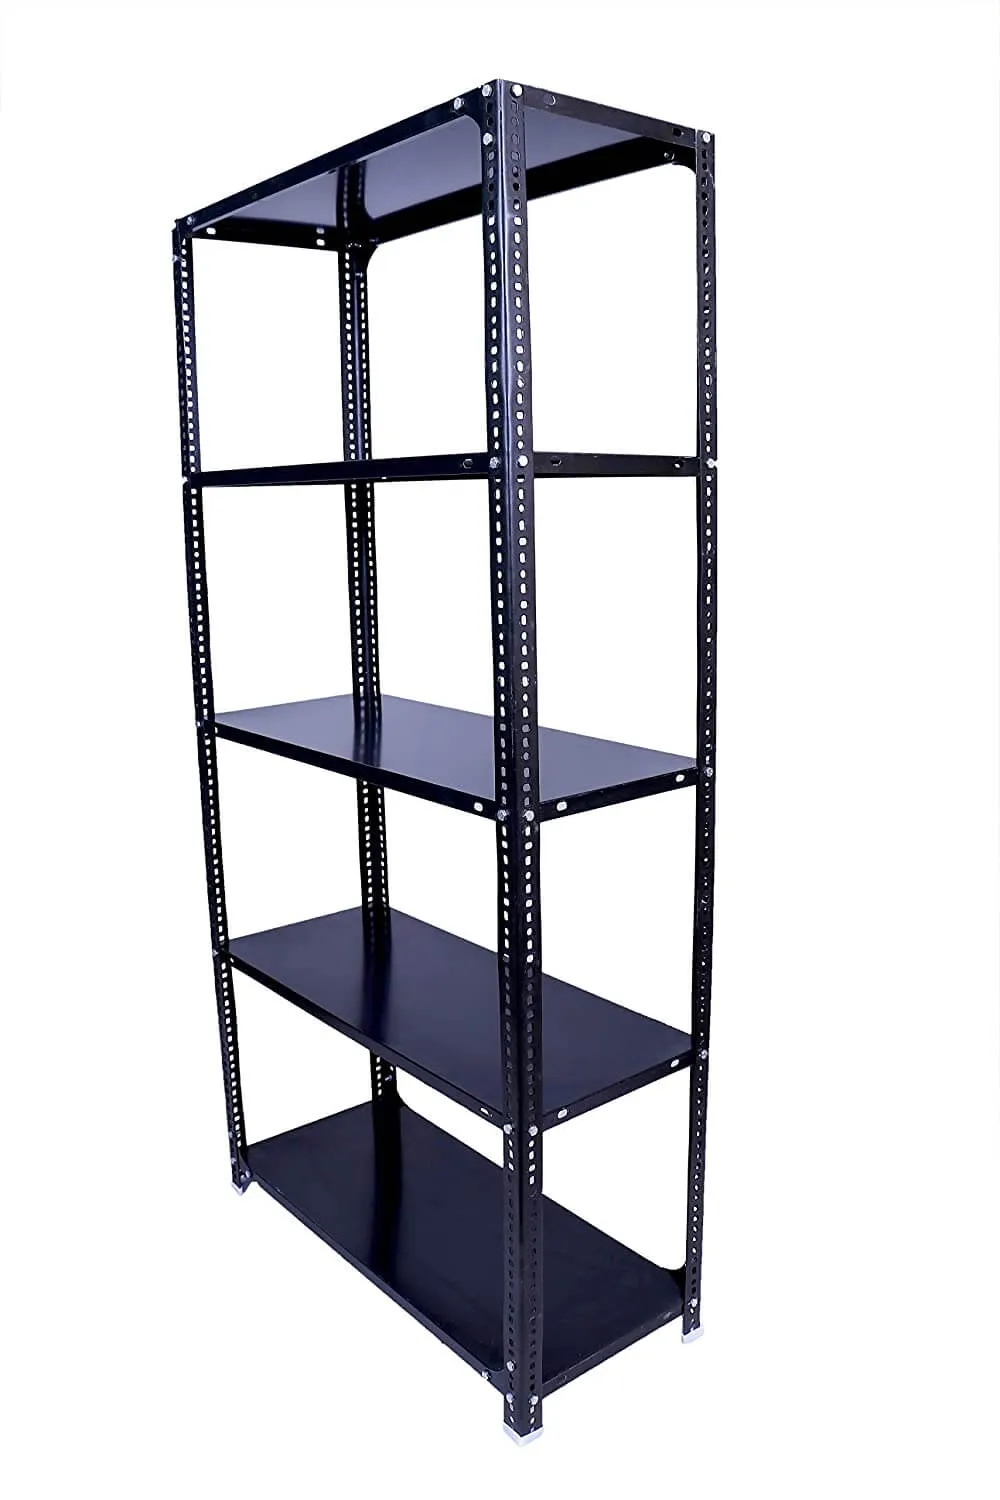 Slotted Angle Racks In Hisar